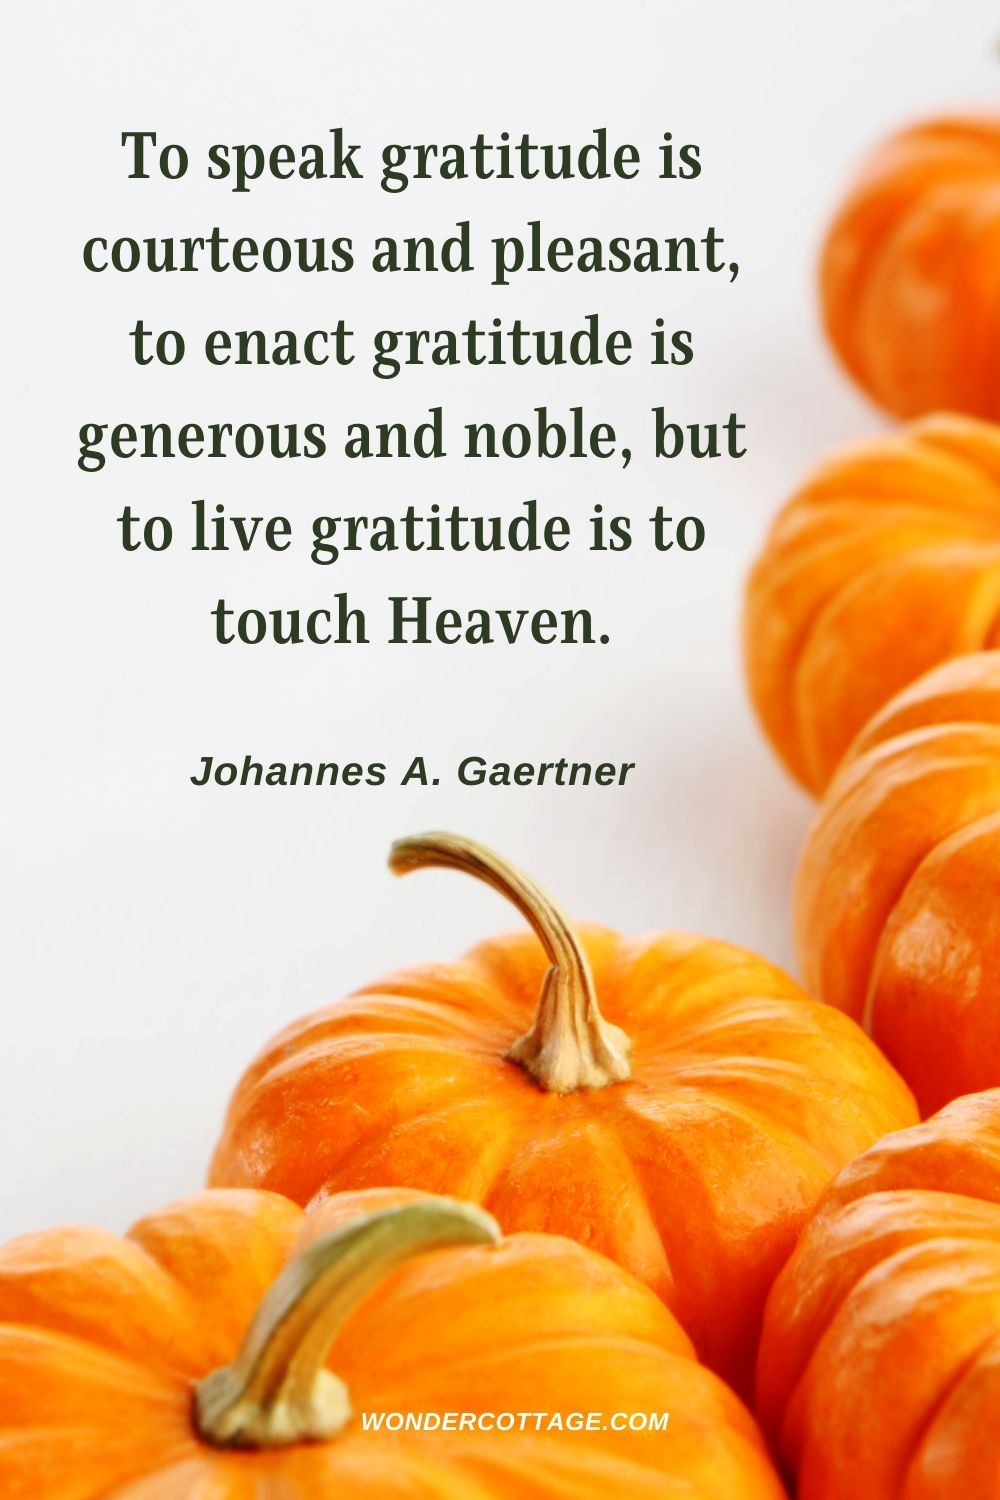 To speak gratitude is courteous and pleasant, to enact gratitude is generous and noble, but to live gratitude is to touch Heaven. Johannes A. Gaertner